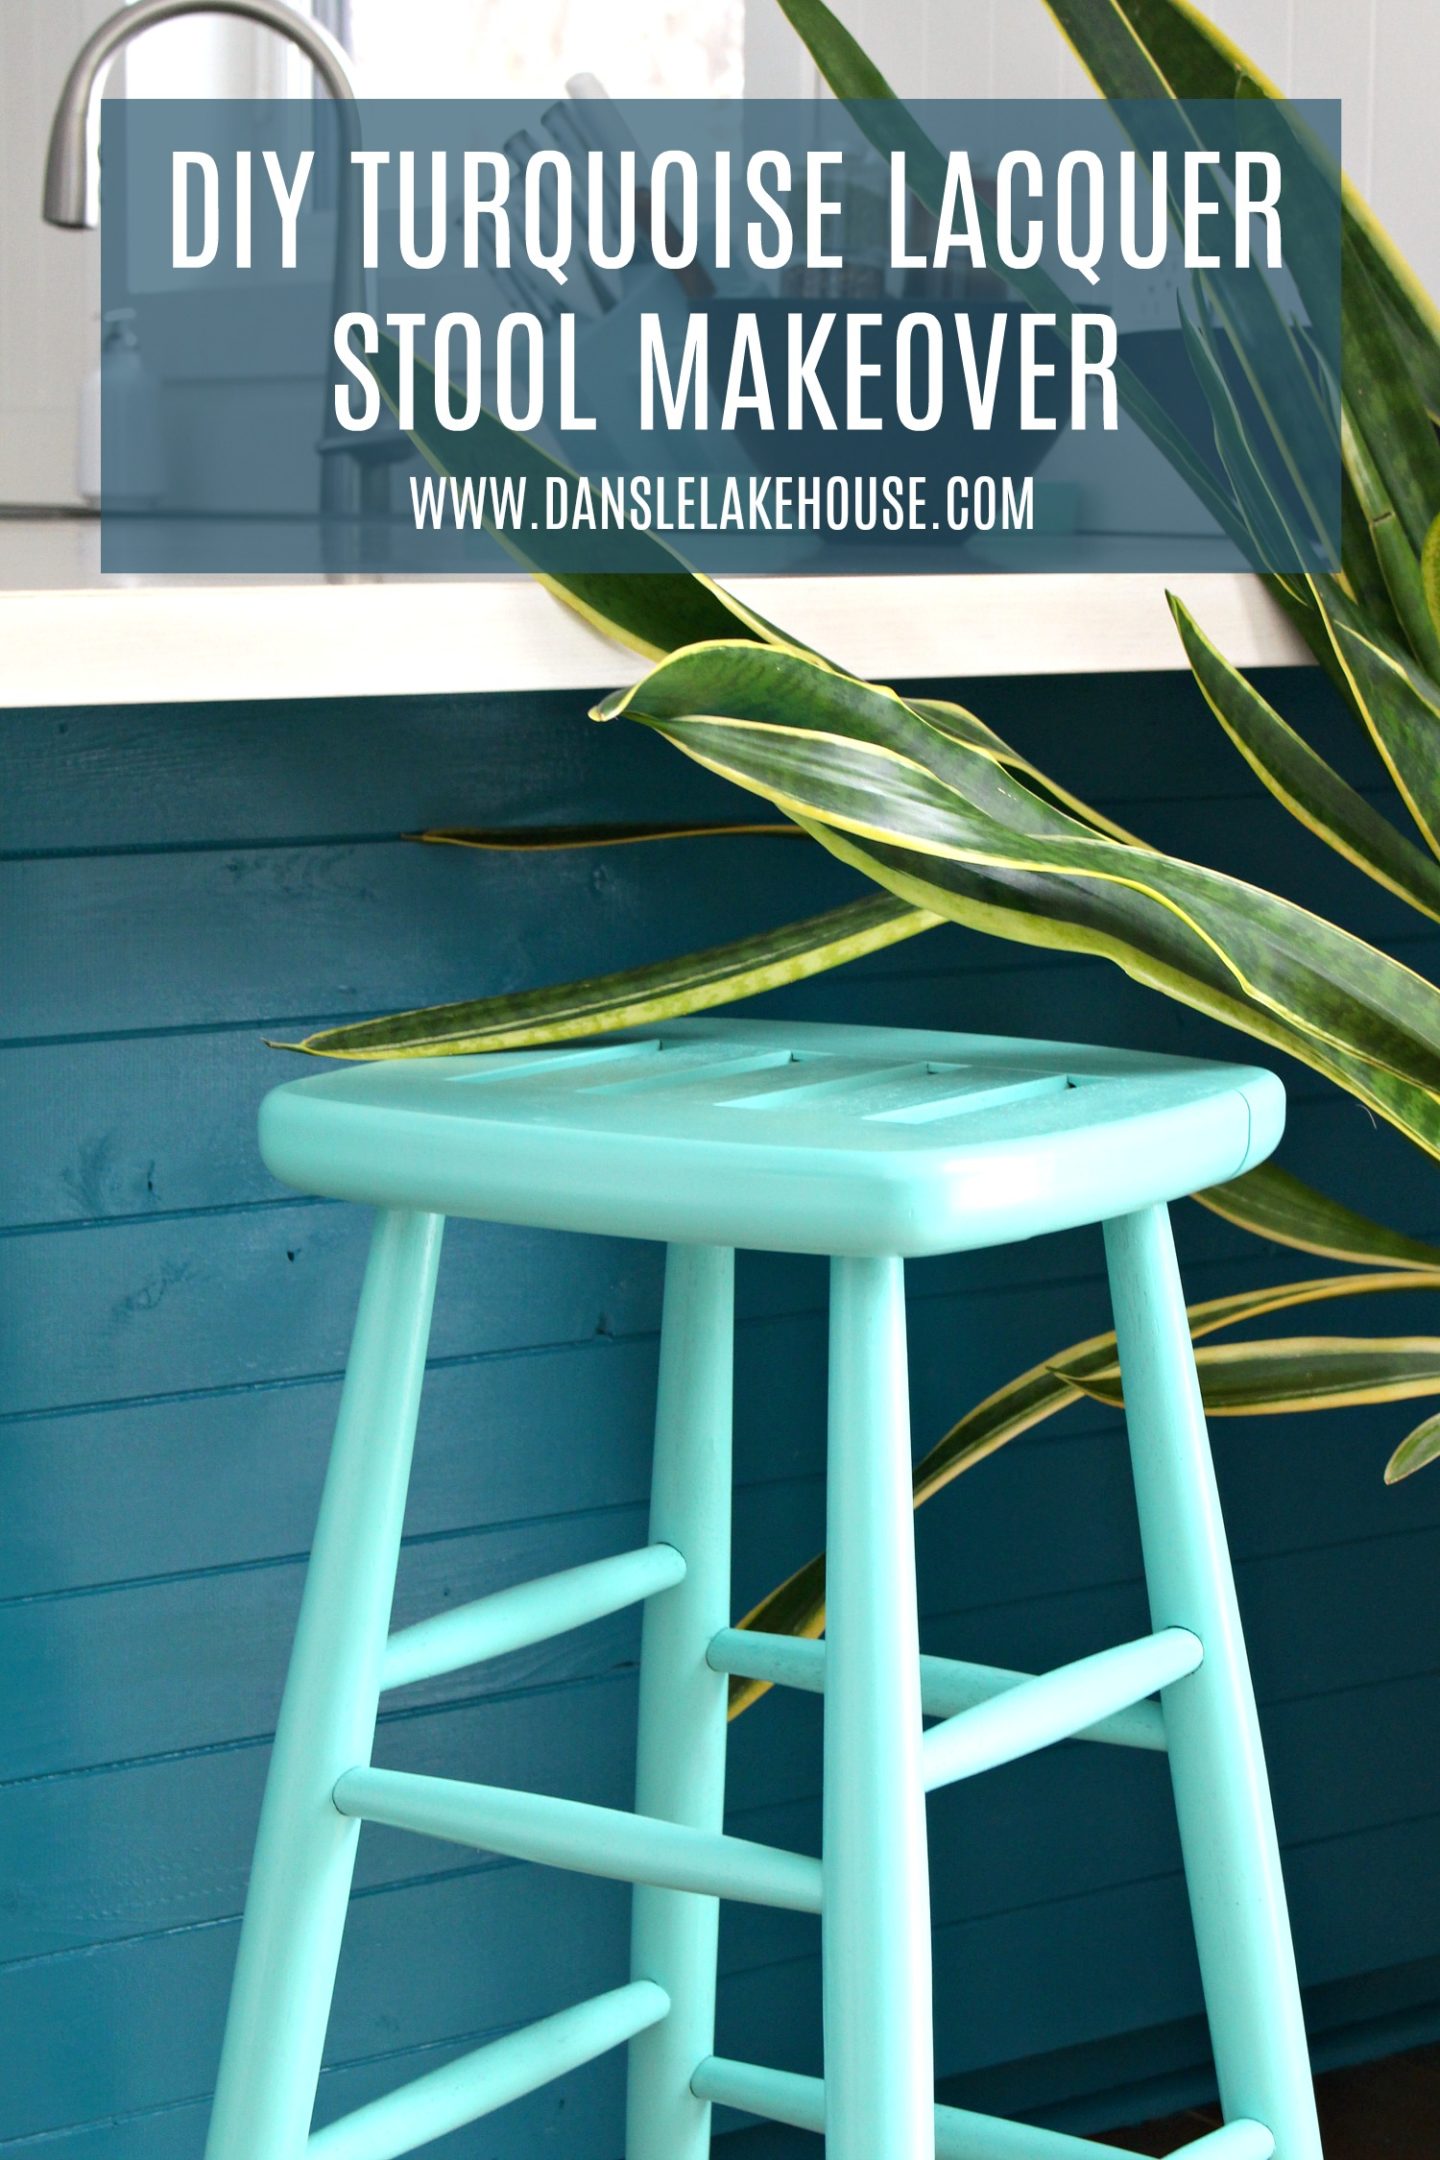 Turquoise Lacquer Stool Makeover | Rust-Oleum Specialty Lacquer Turquoise Review